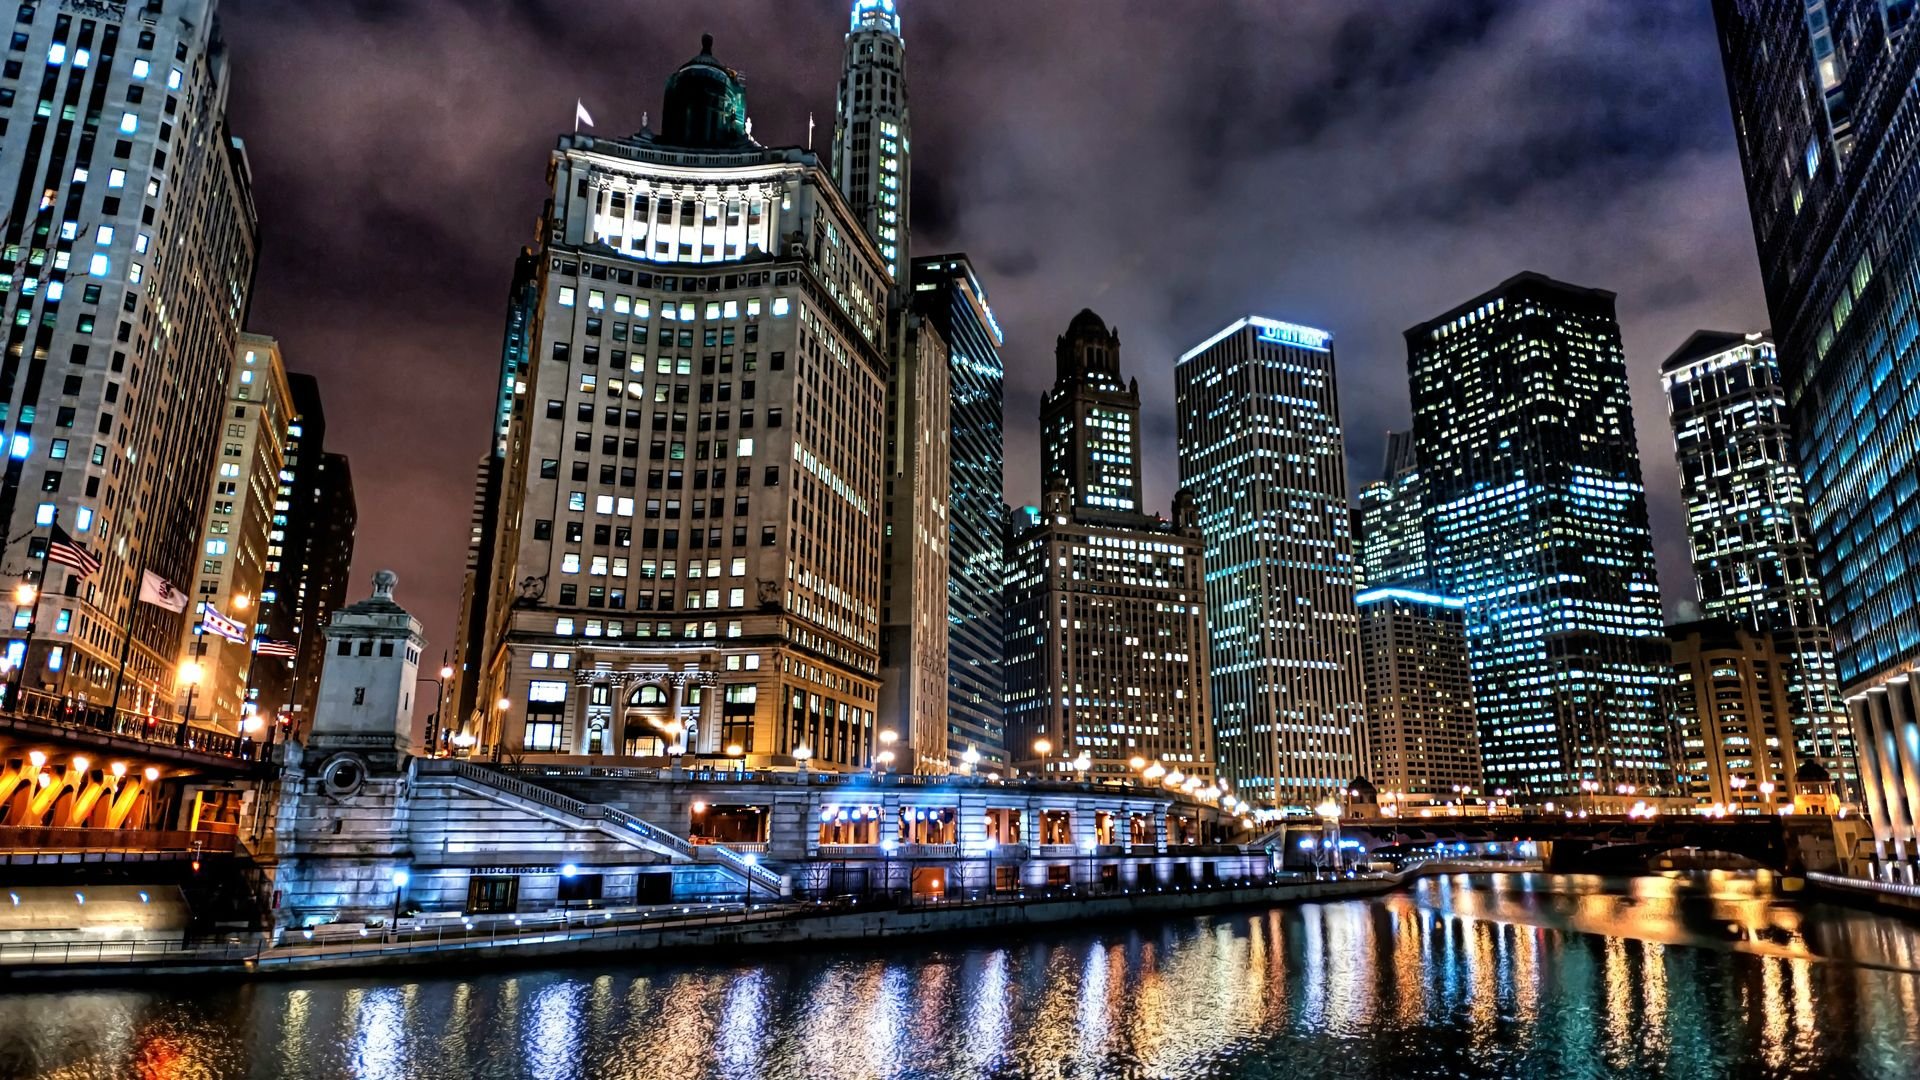 Chicago Wallpaper HD 74 images